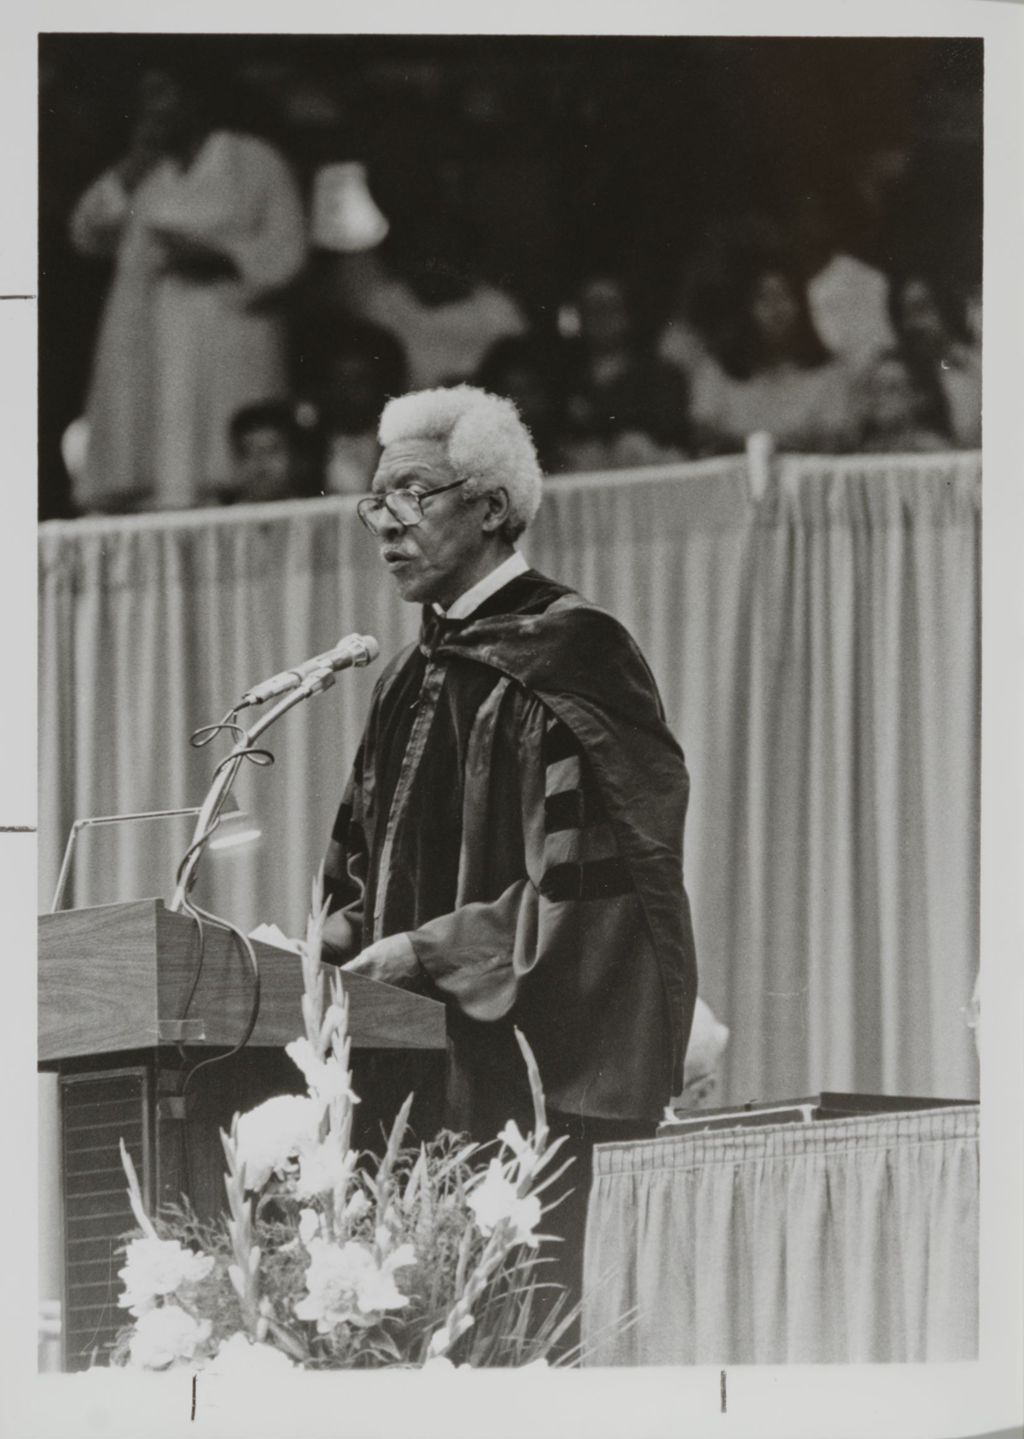 Miniature of Bayard Rustin addressing the audience at the graduation ceremony